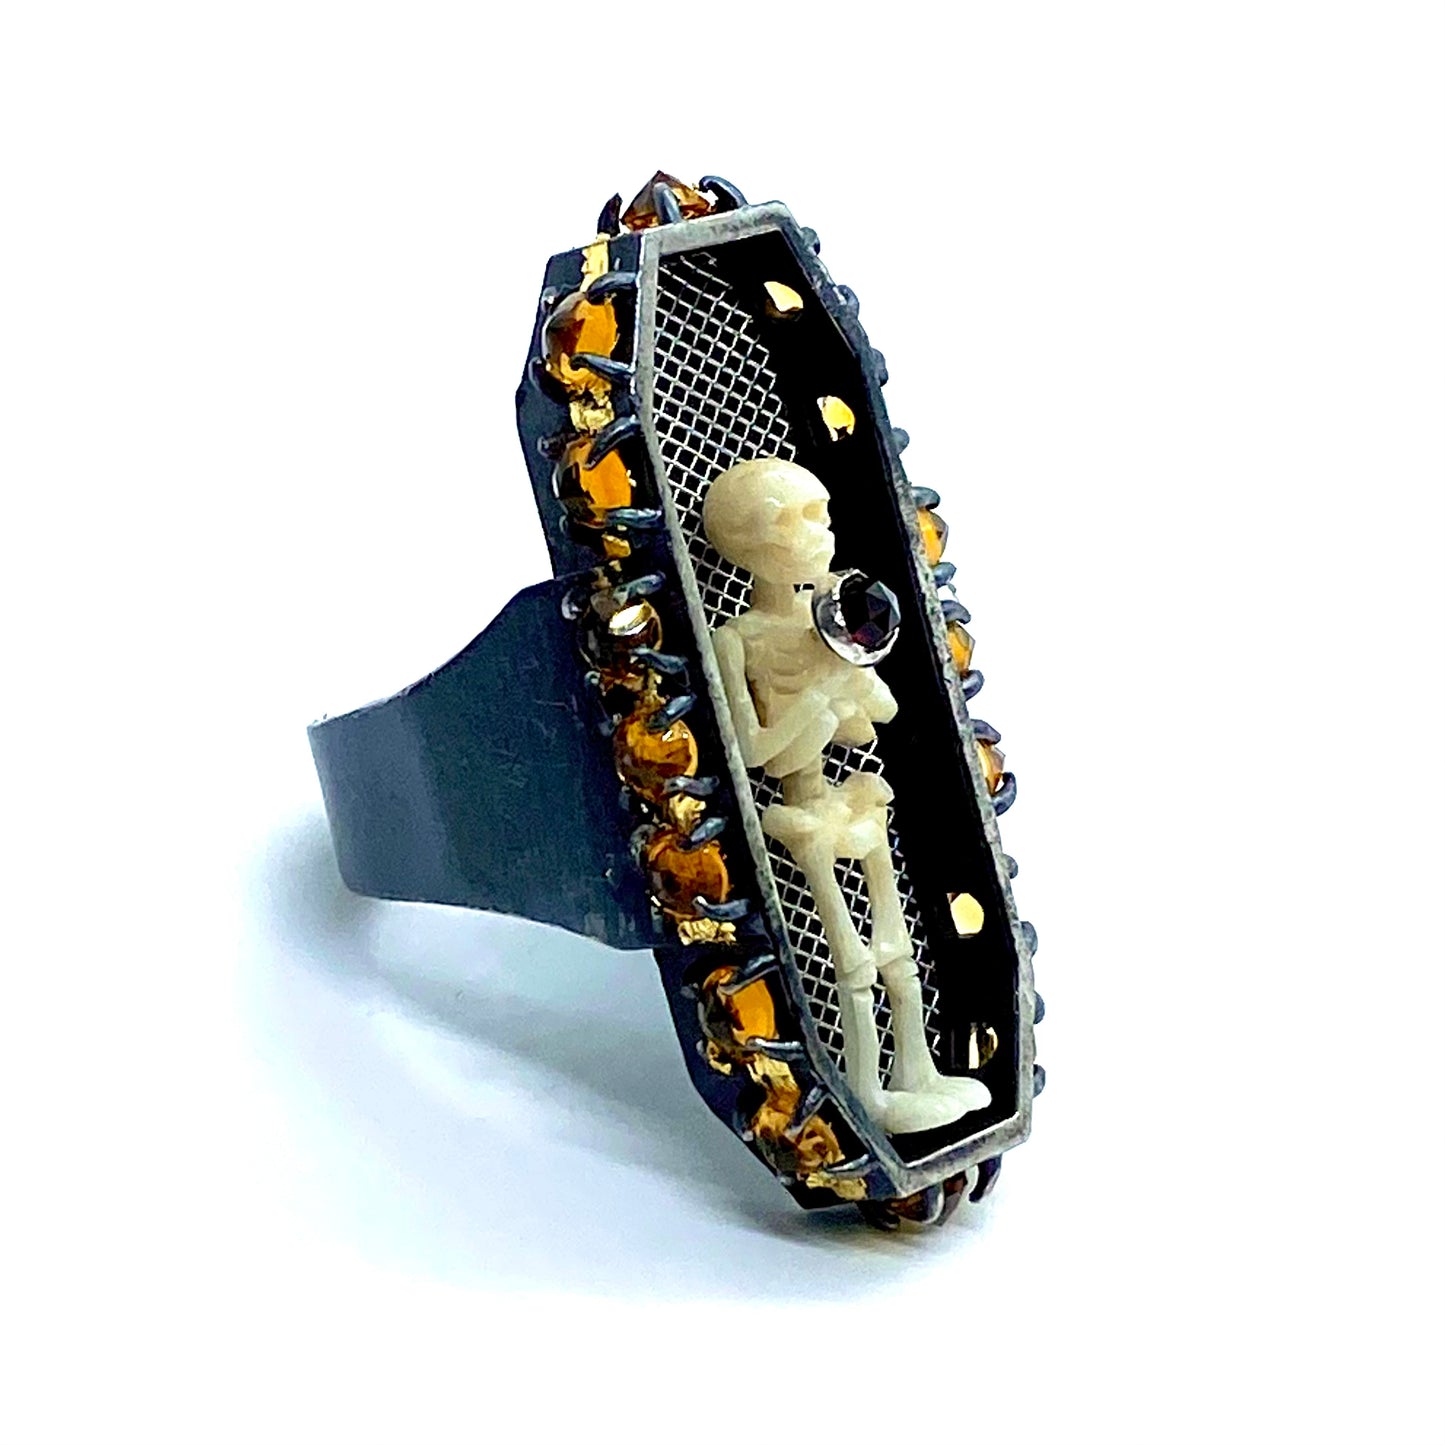 Hephaestus’s Smite Carved Cow Bone Coffin Ring in Sterling Silver With Citrine and Garnet